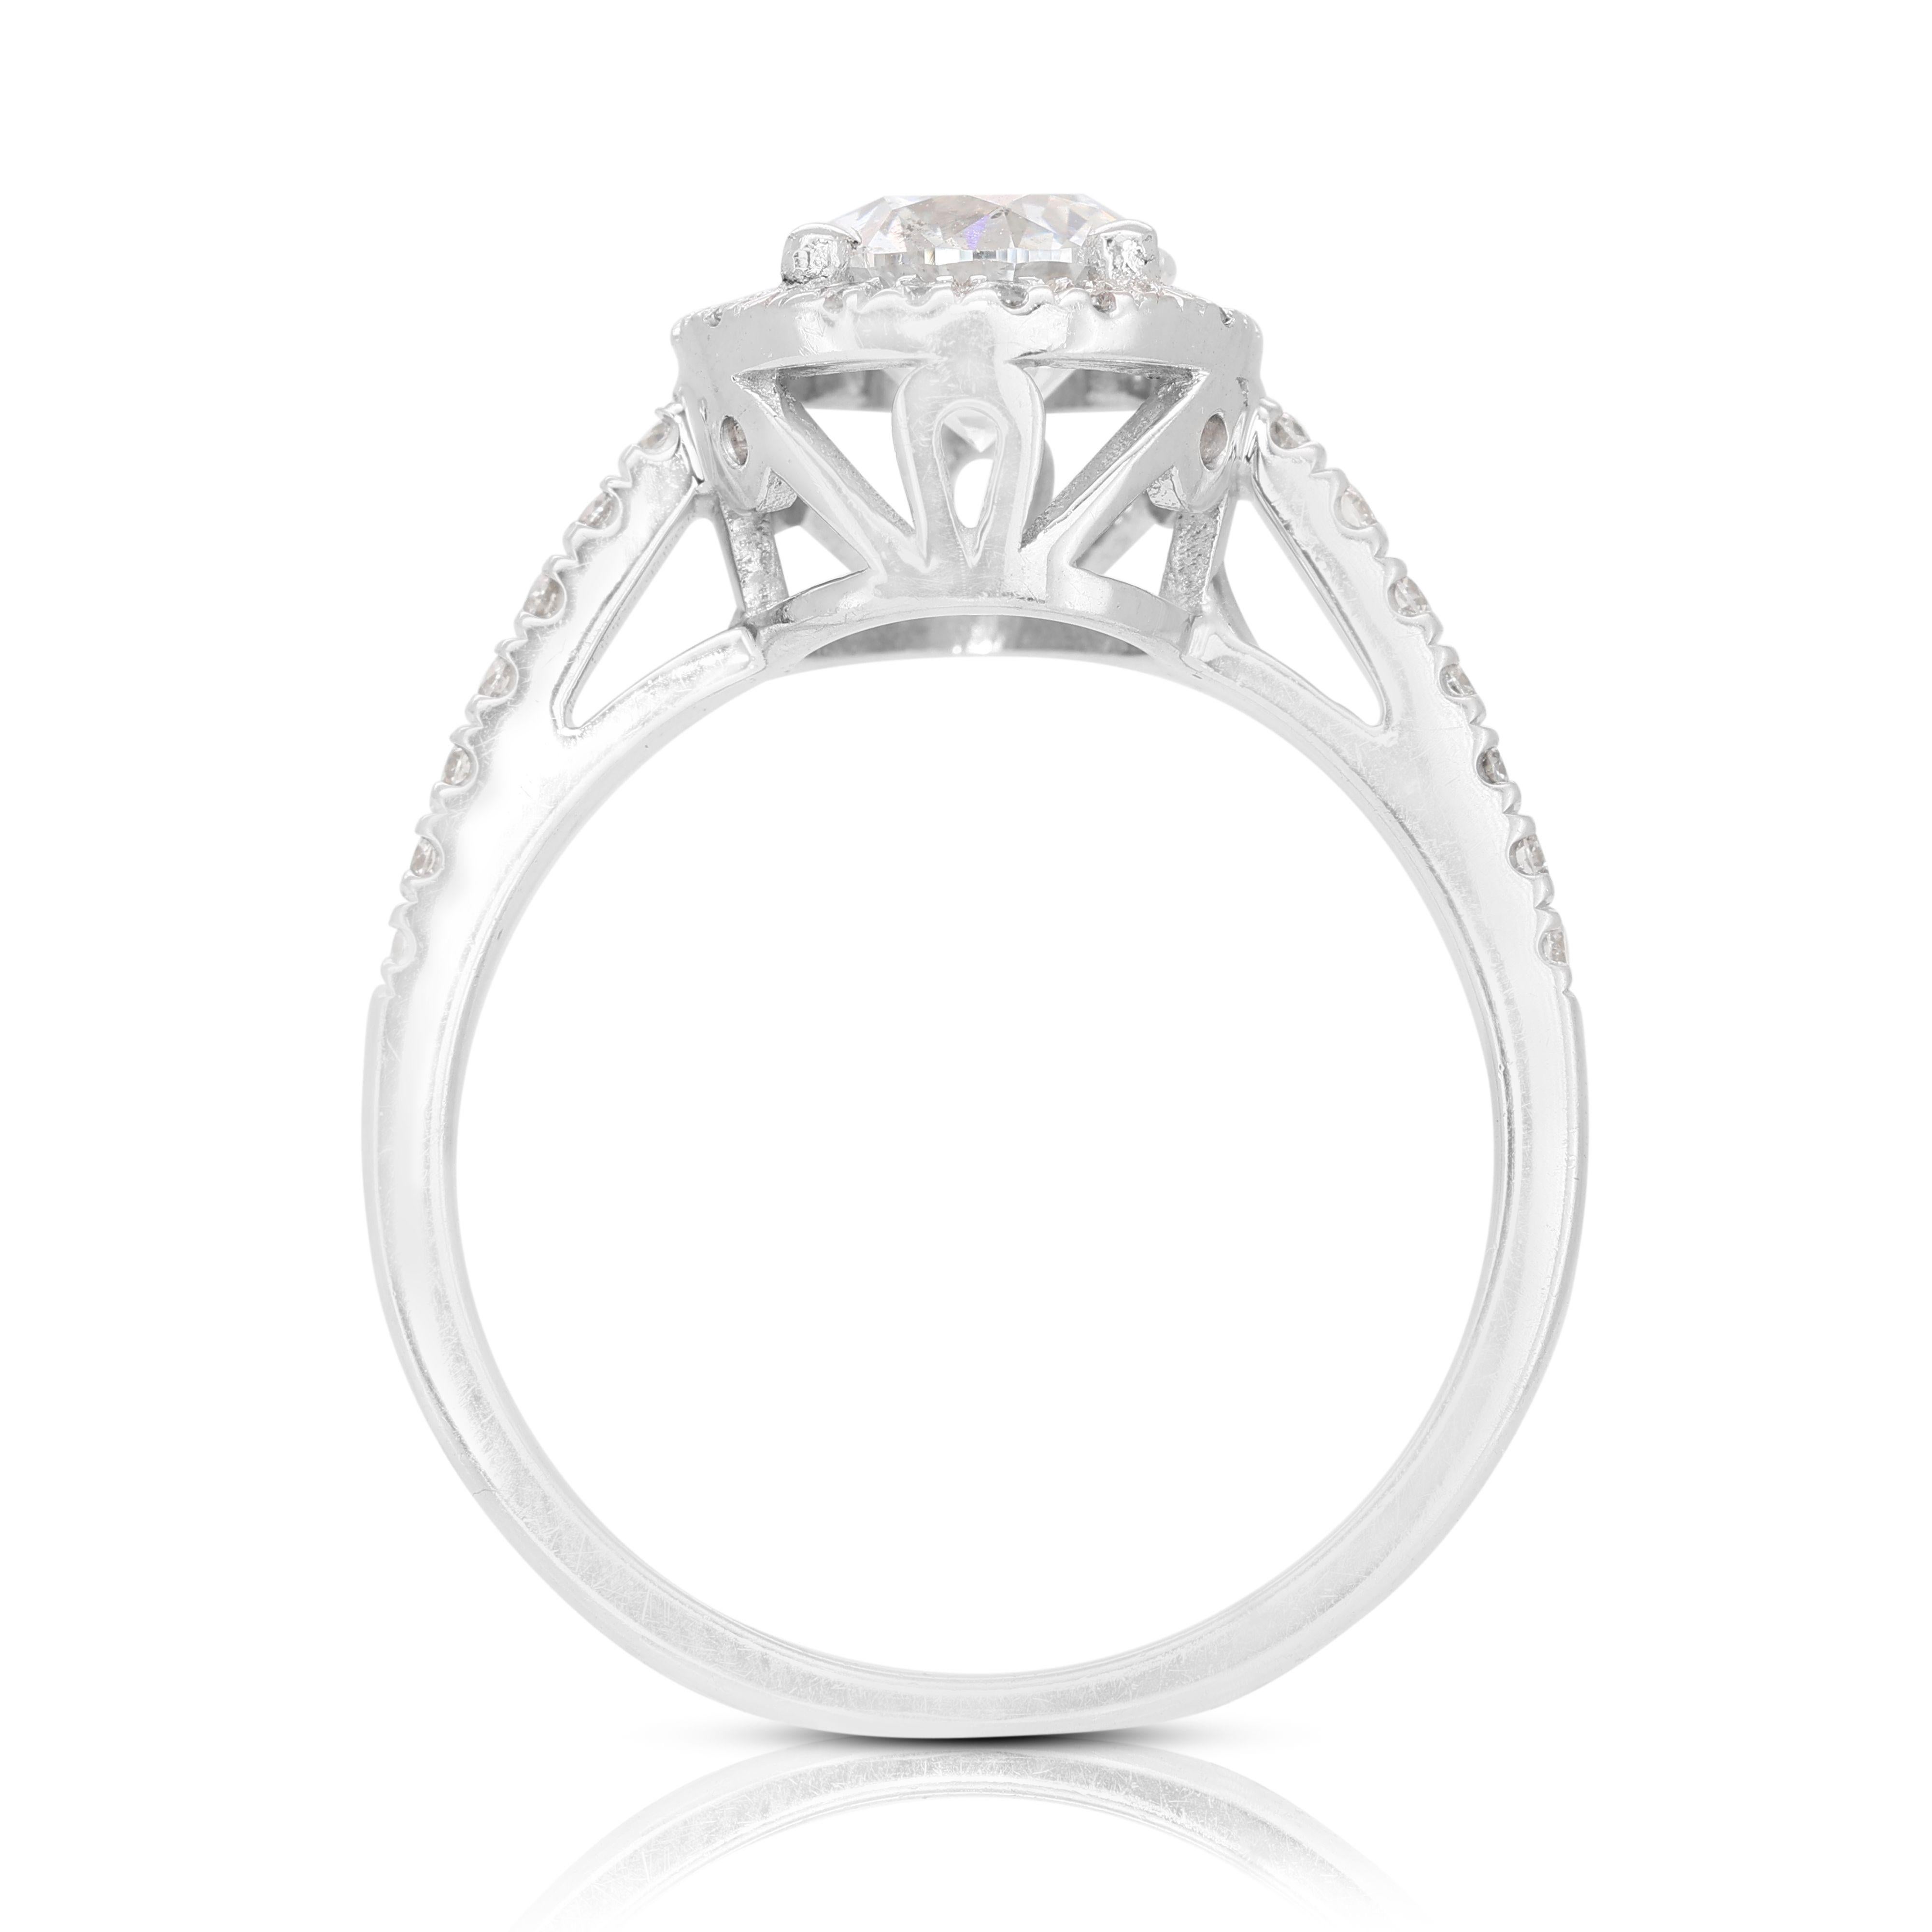 Dazzling 0.70ct Pave Halo Diamond Ring set in 14K White Gold For Sale 2